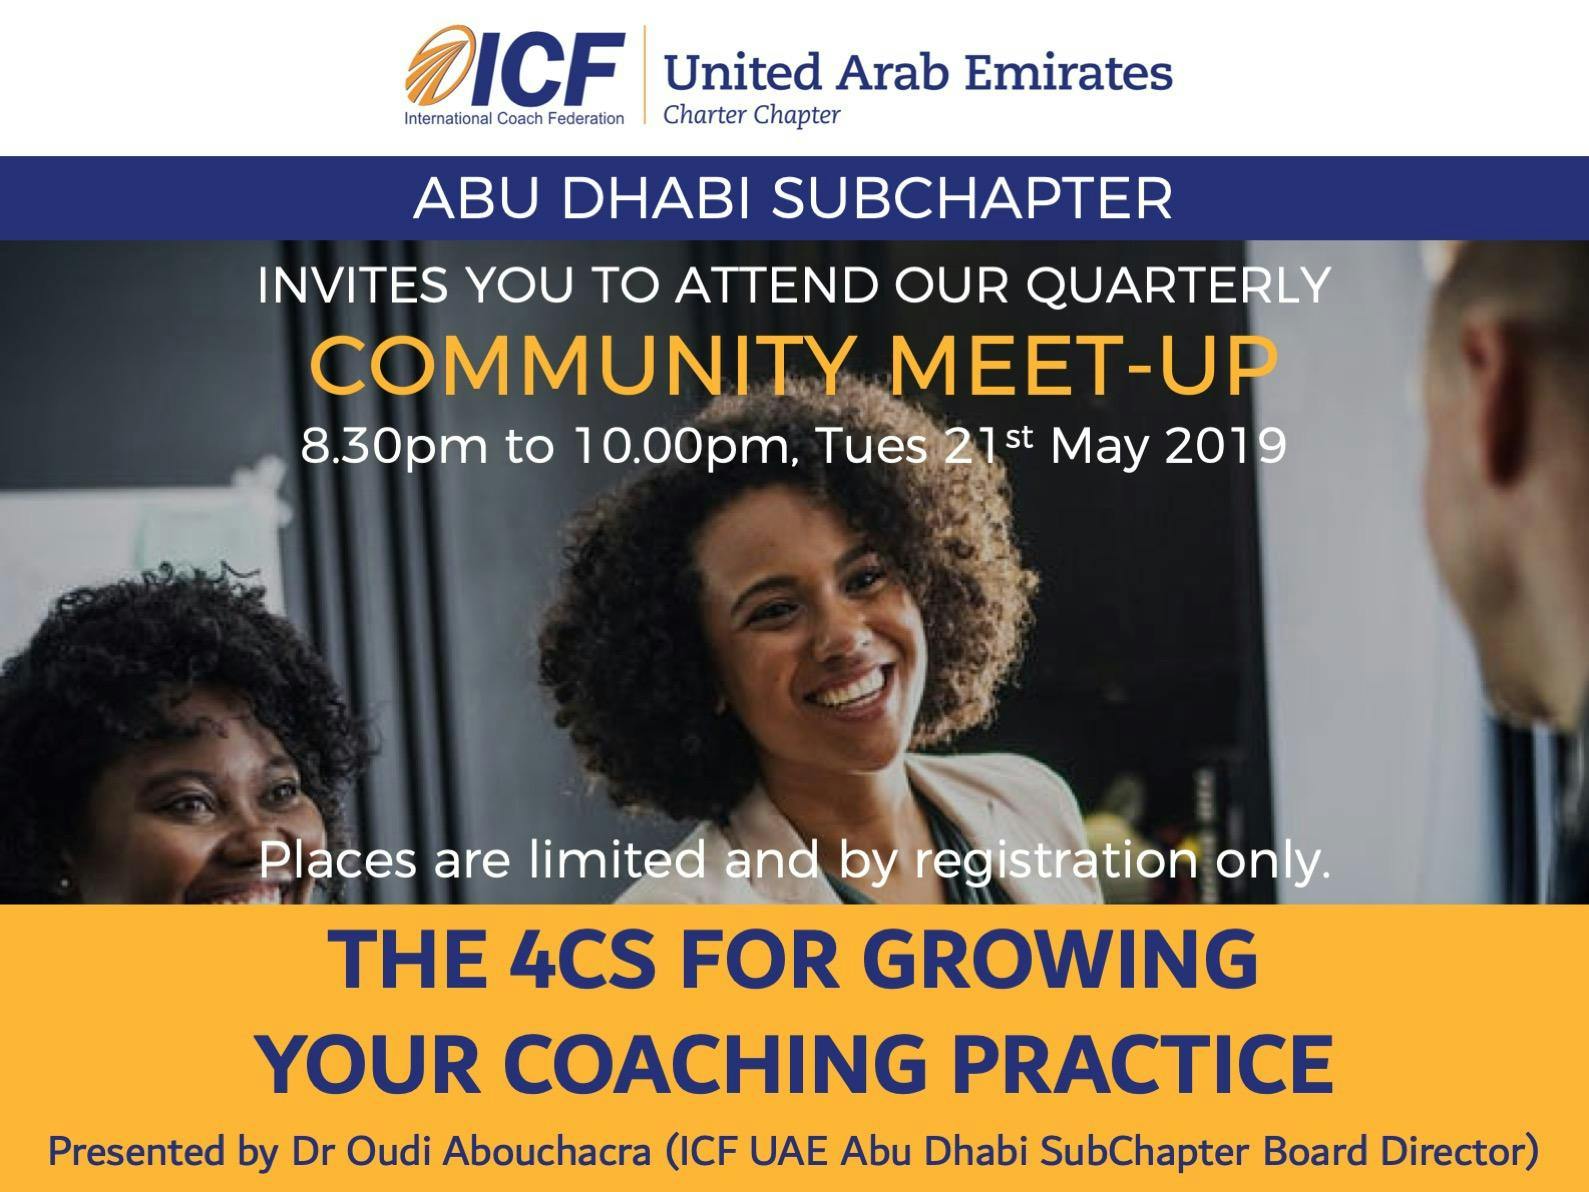 2nd quarterly ICF Abu Dhabi SubChapter Community Meet-up for 2019 